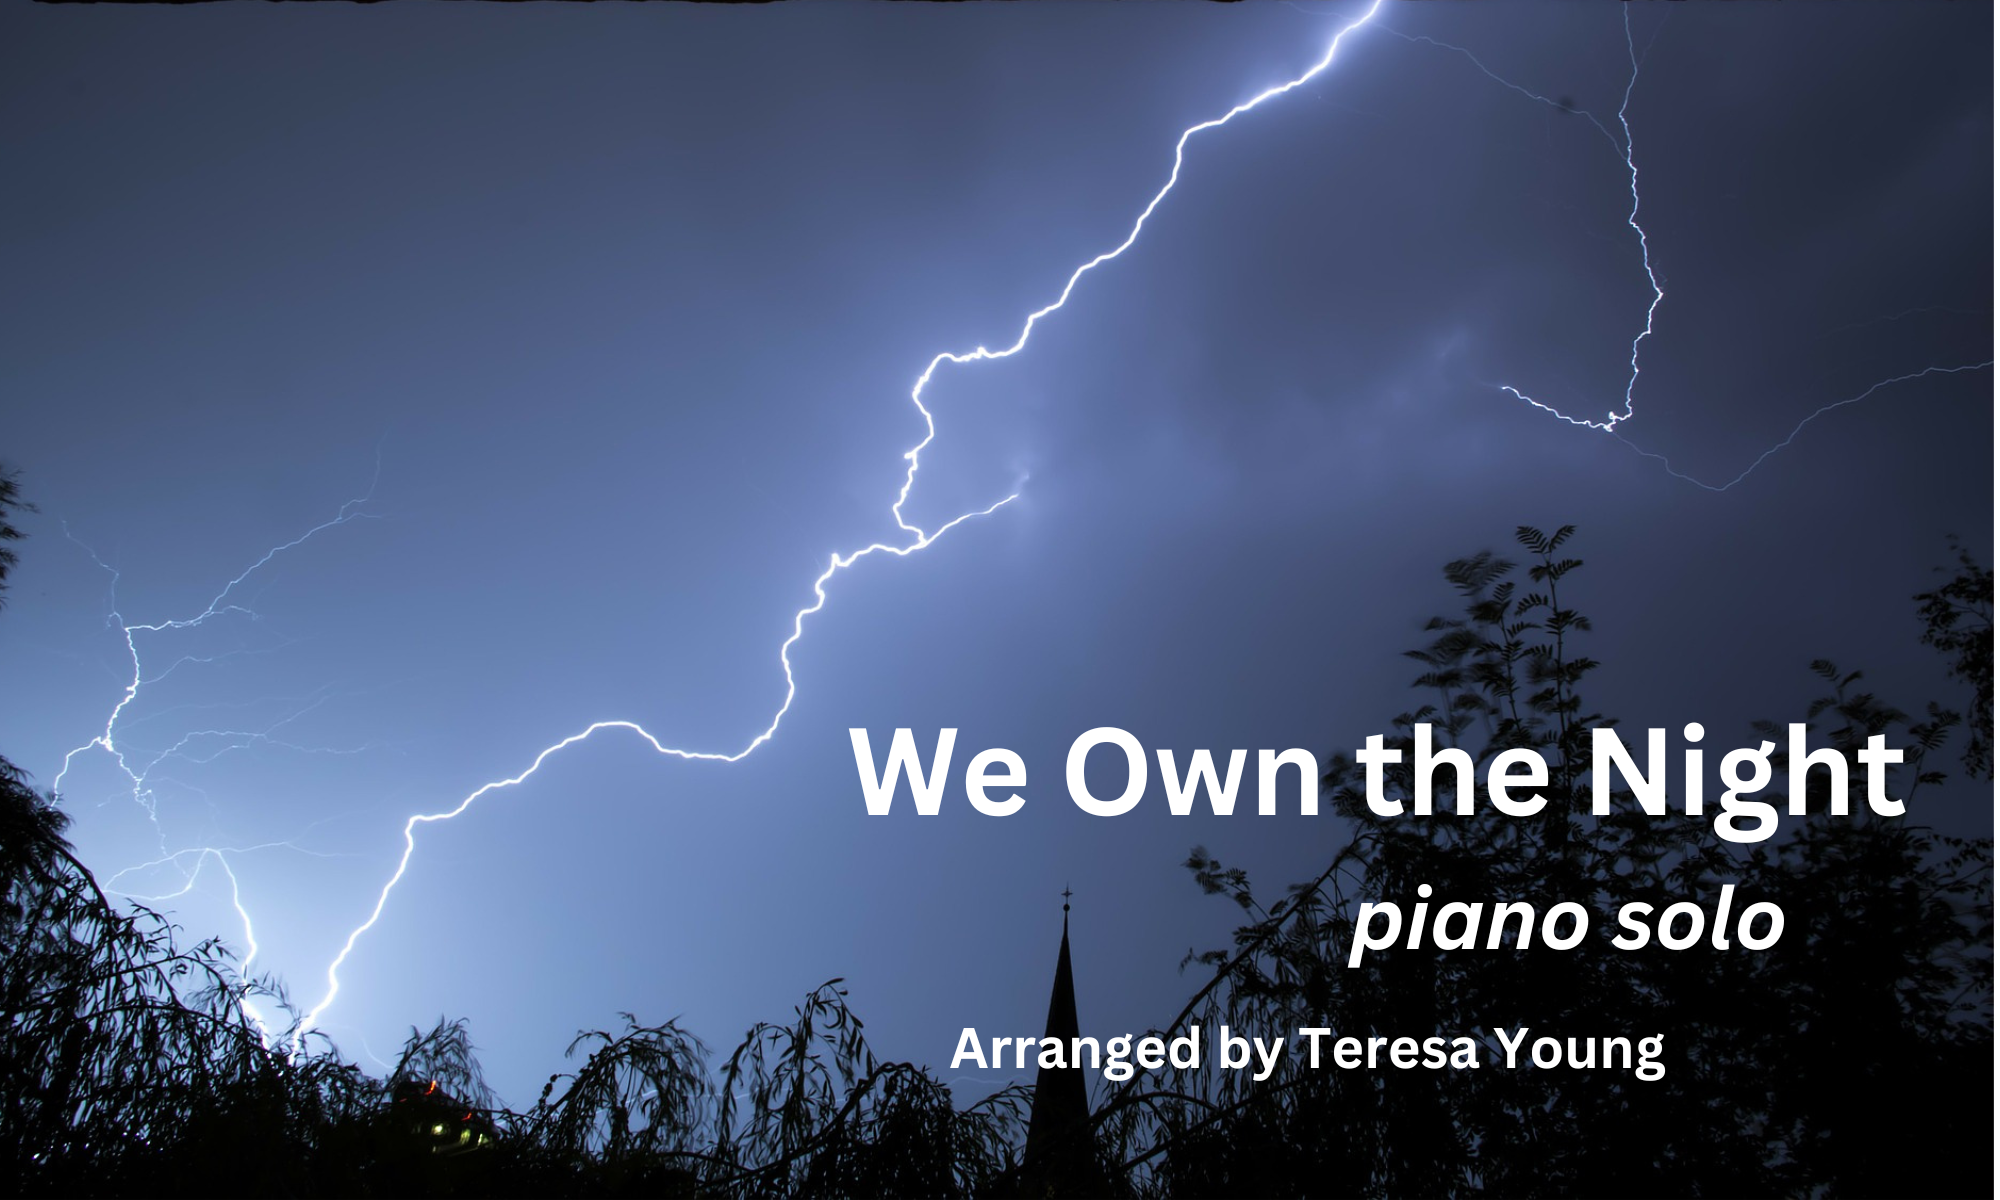 We Own the Night, from Zombies 2, piano solo arr. Teresa Young